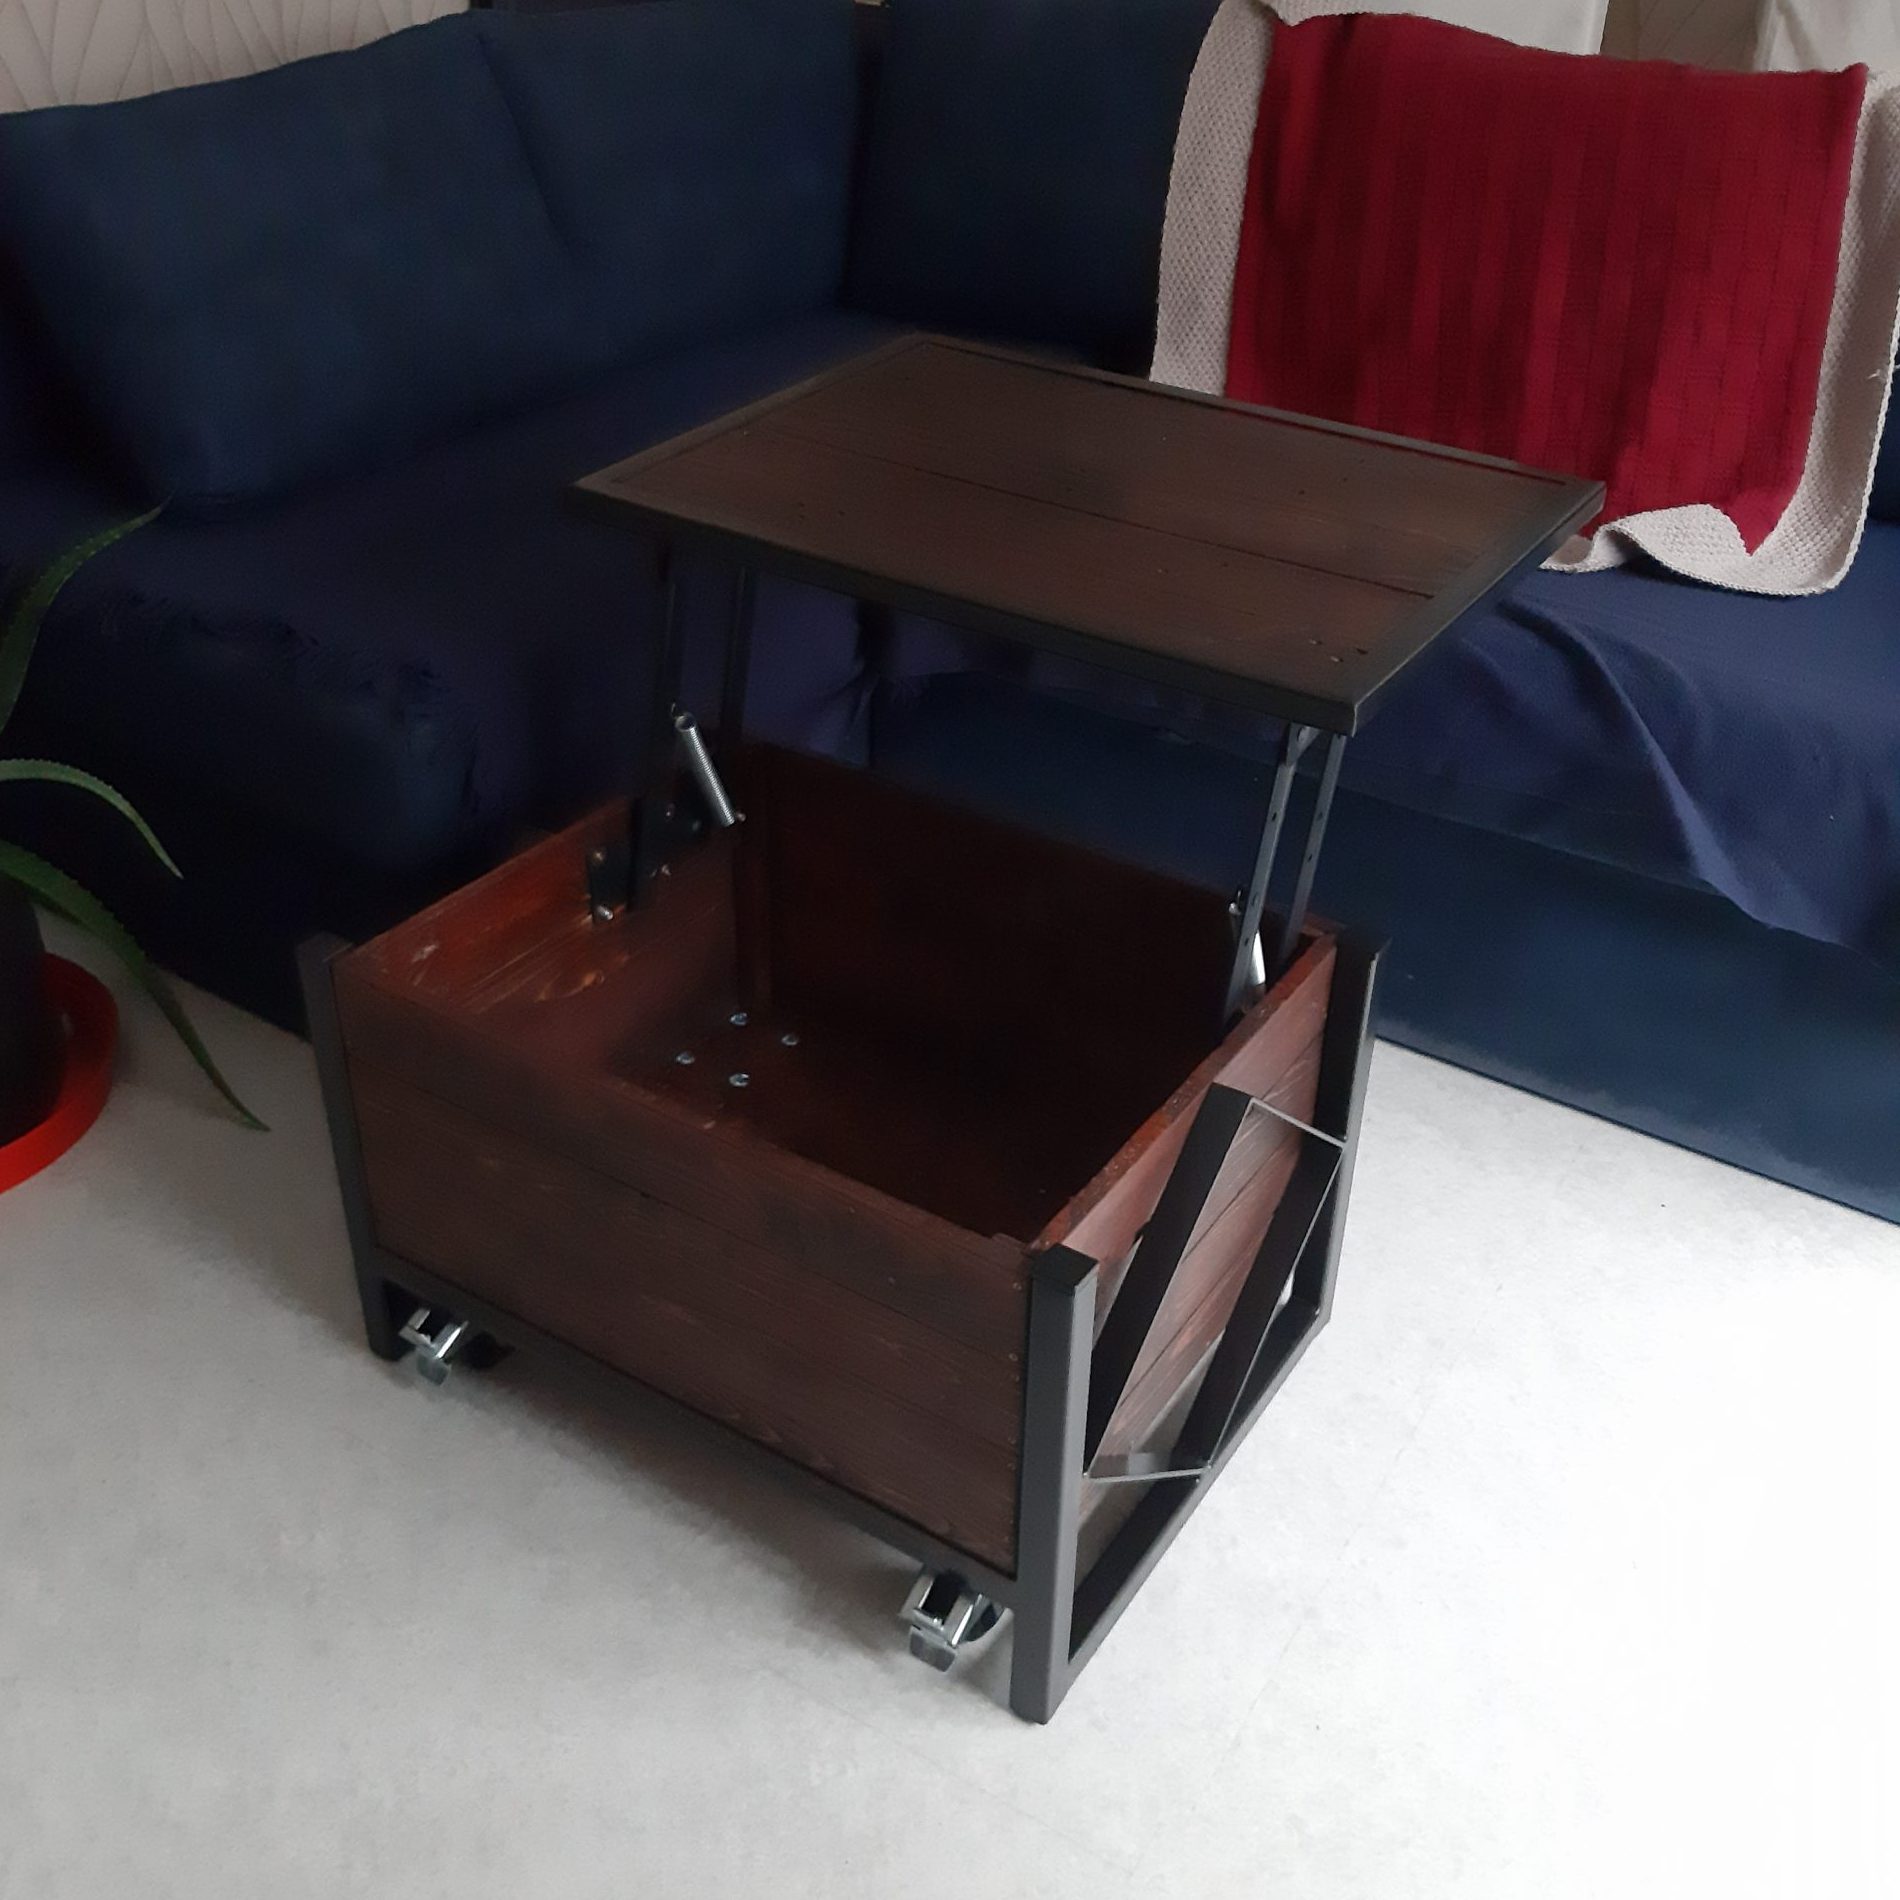 Table basse relevable